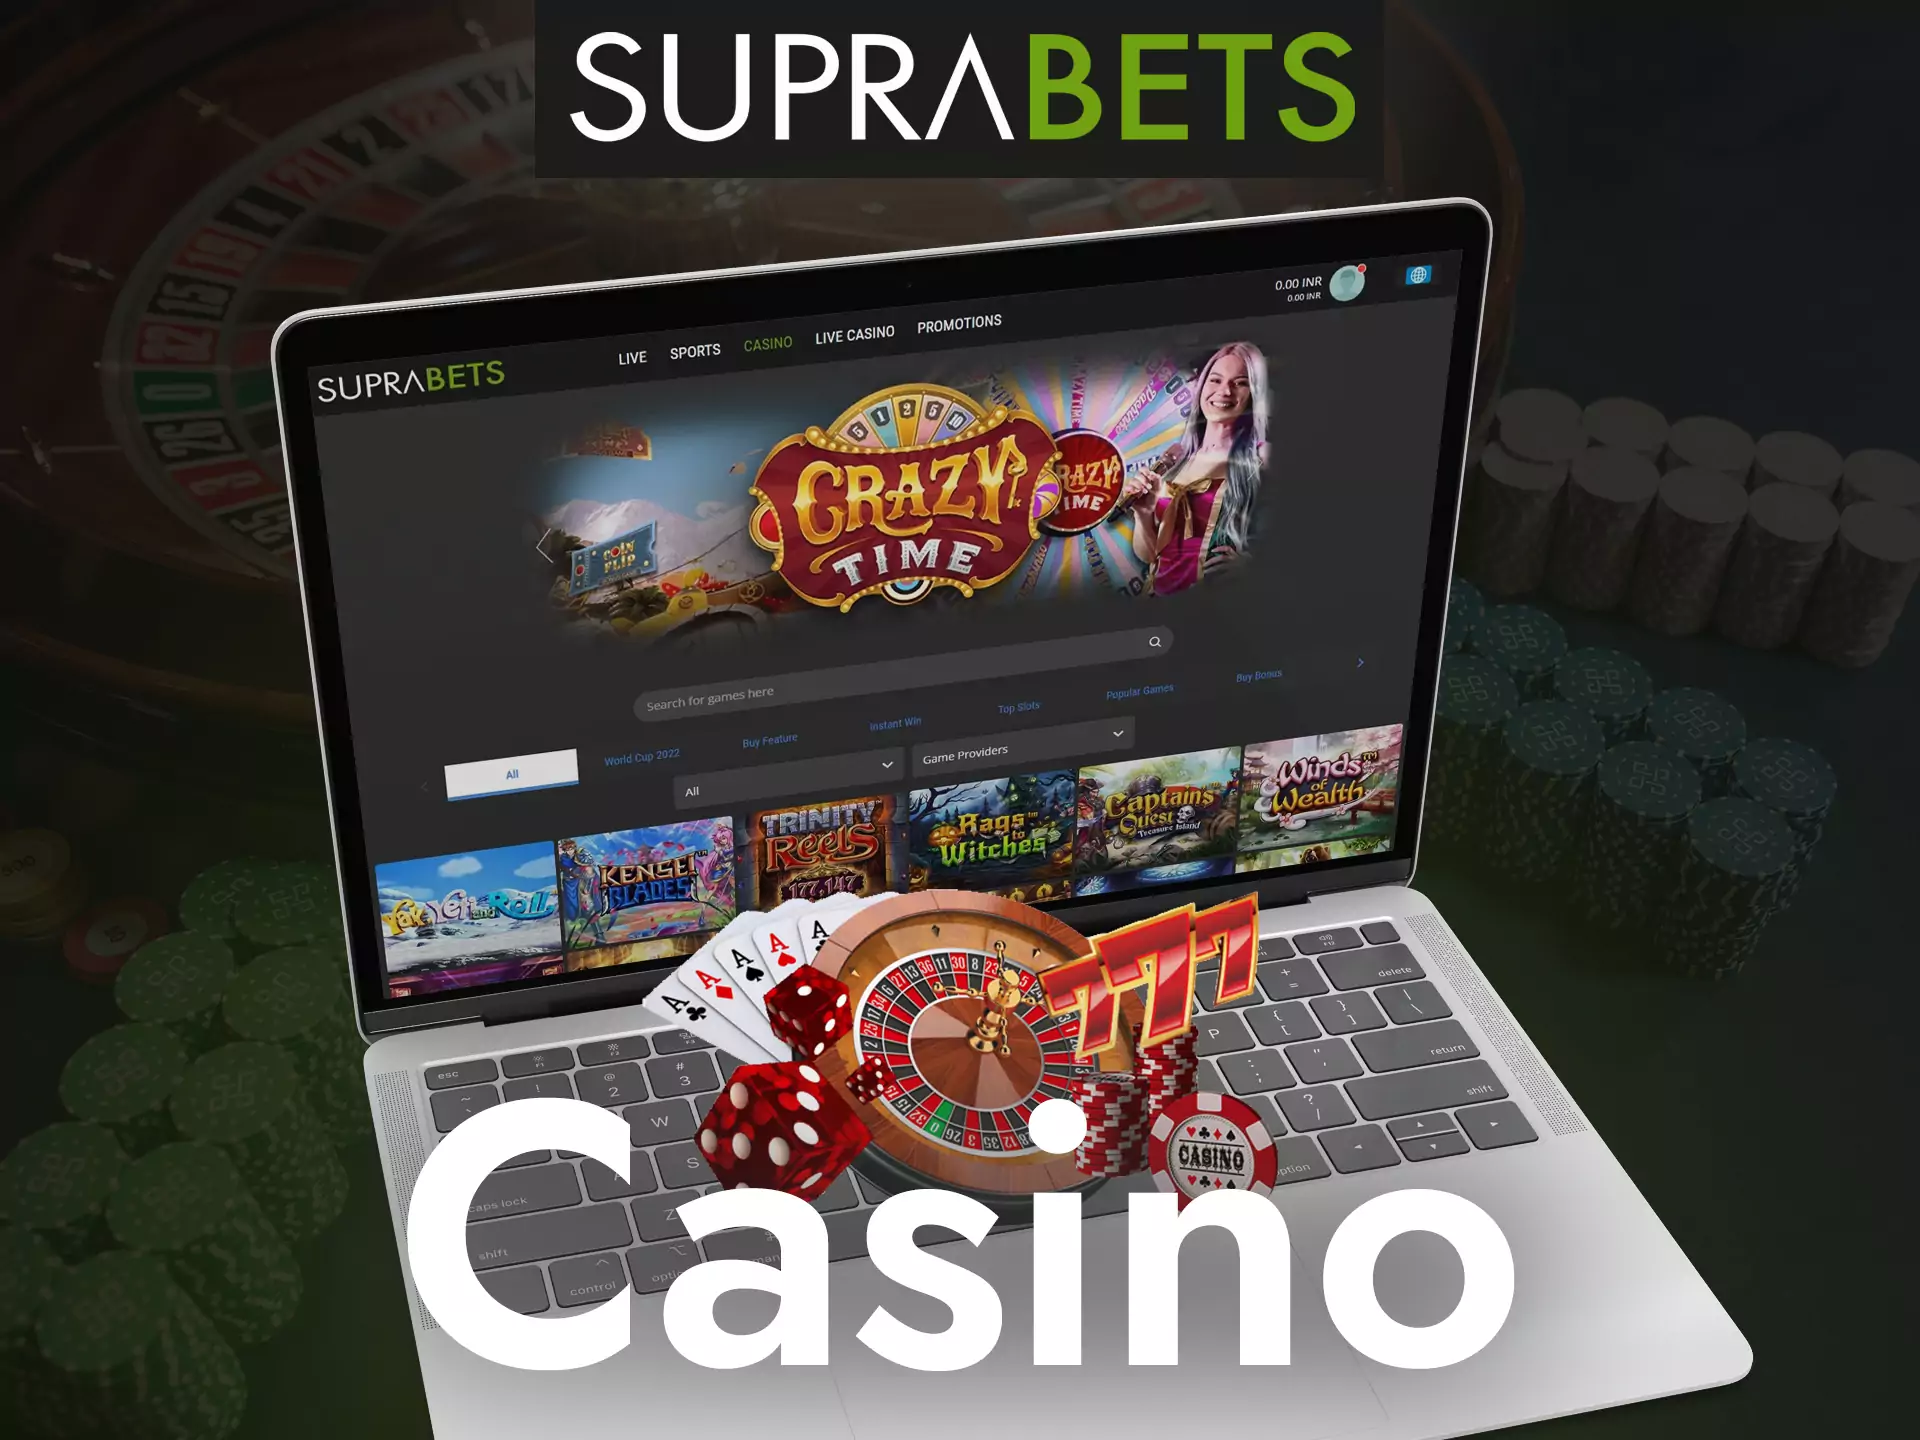 Try your luck at Suprabets Casino.